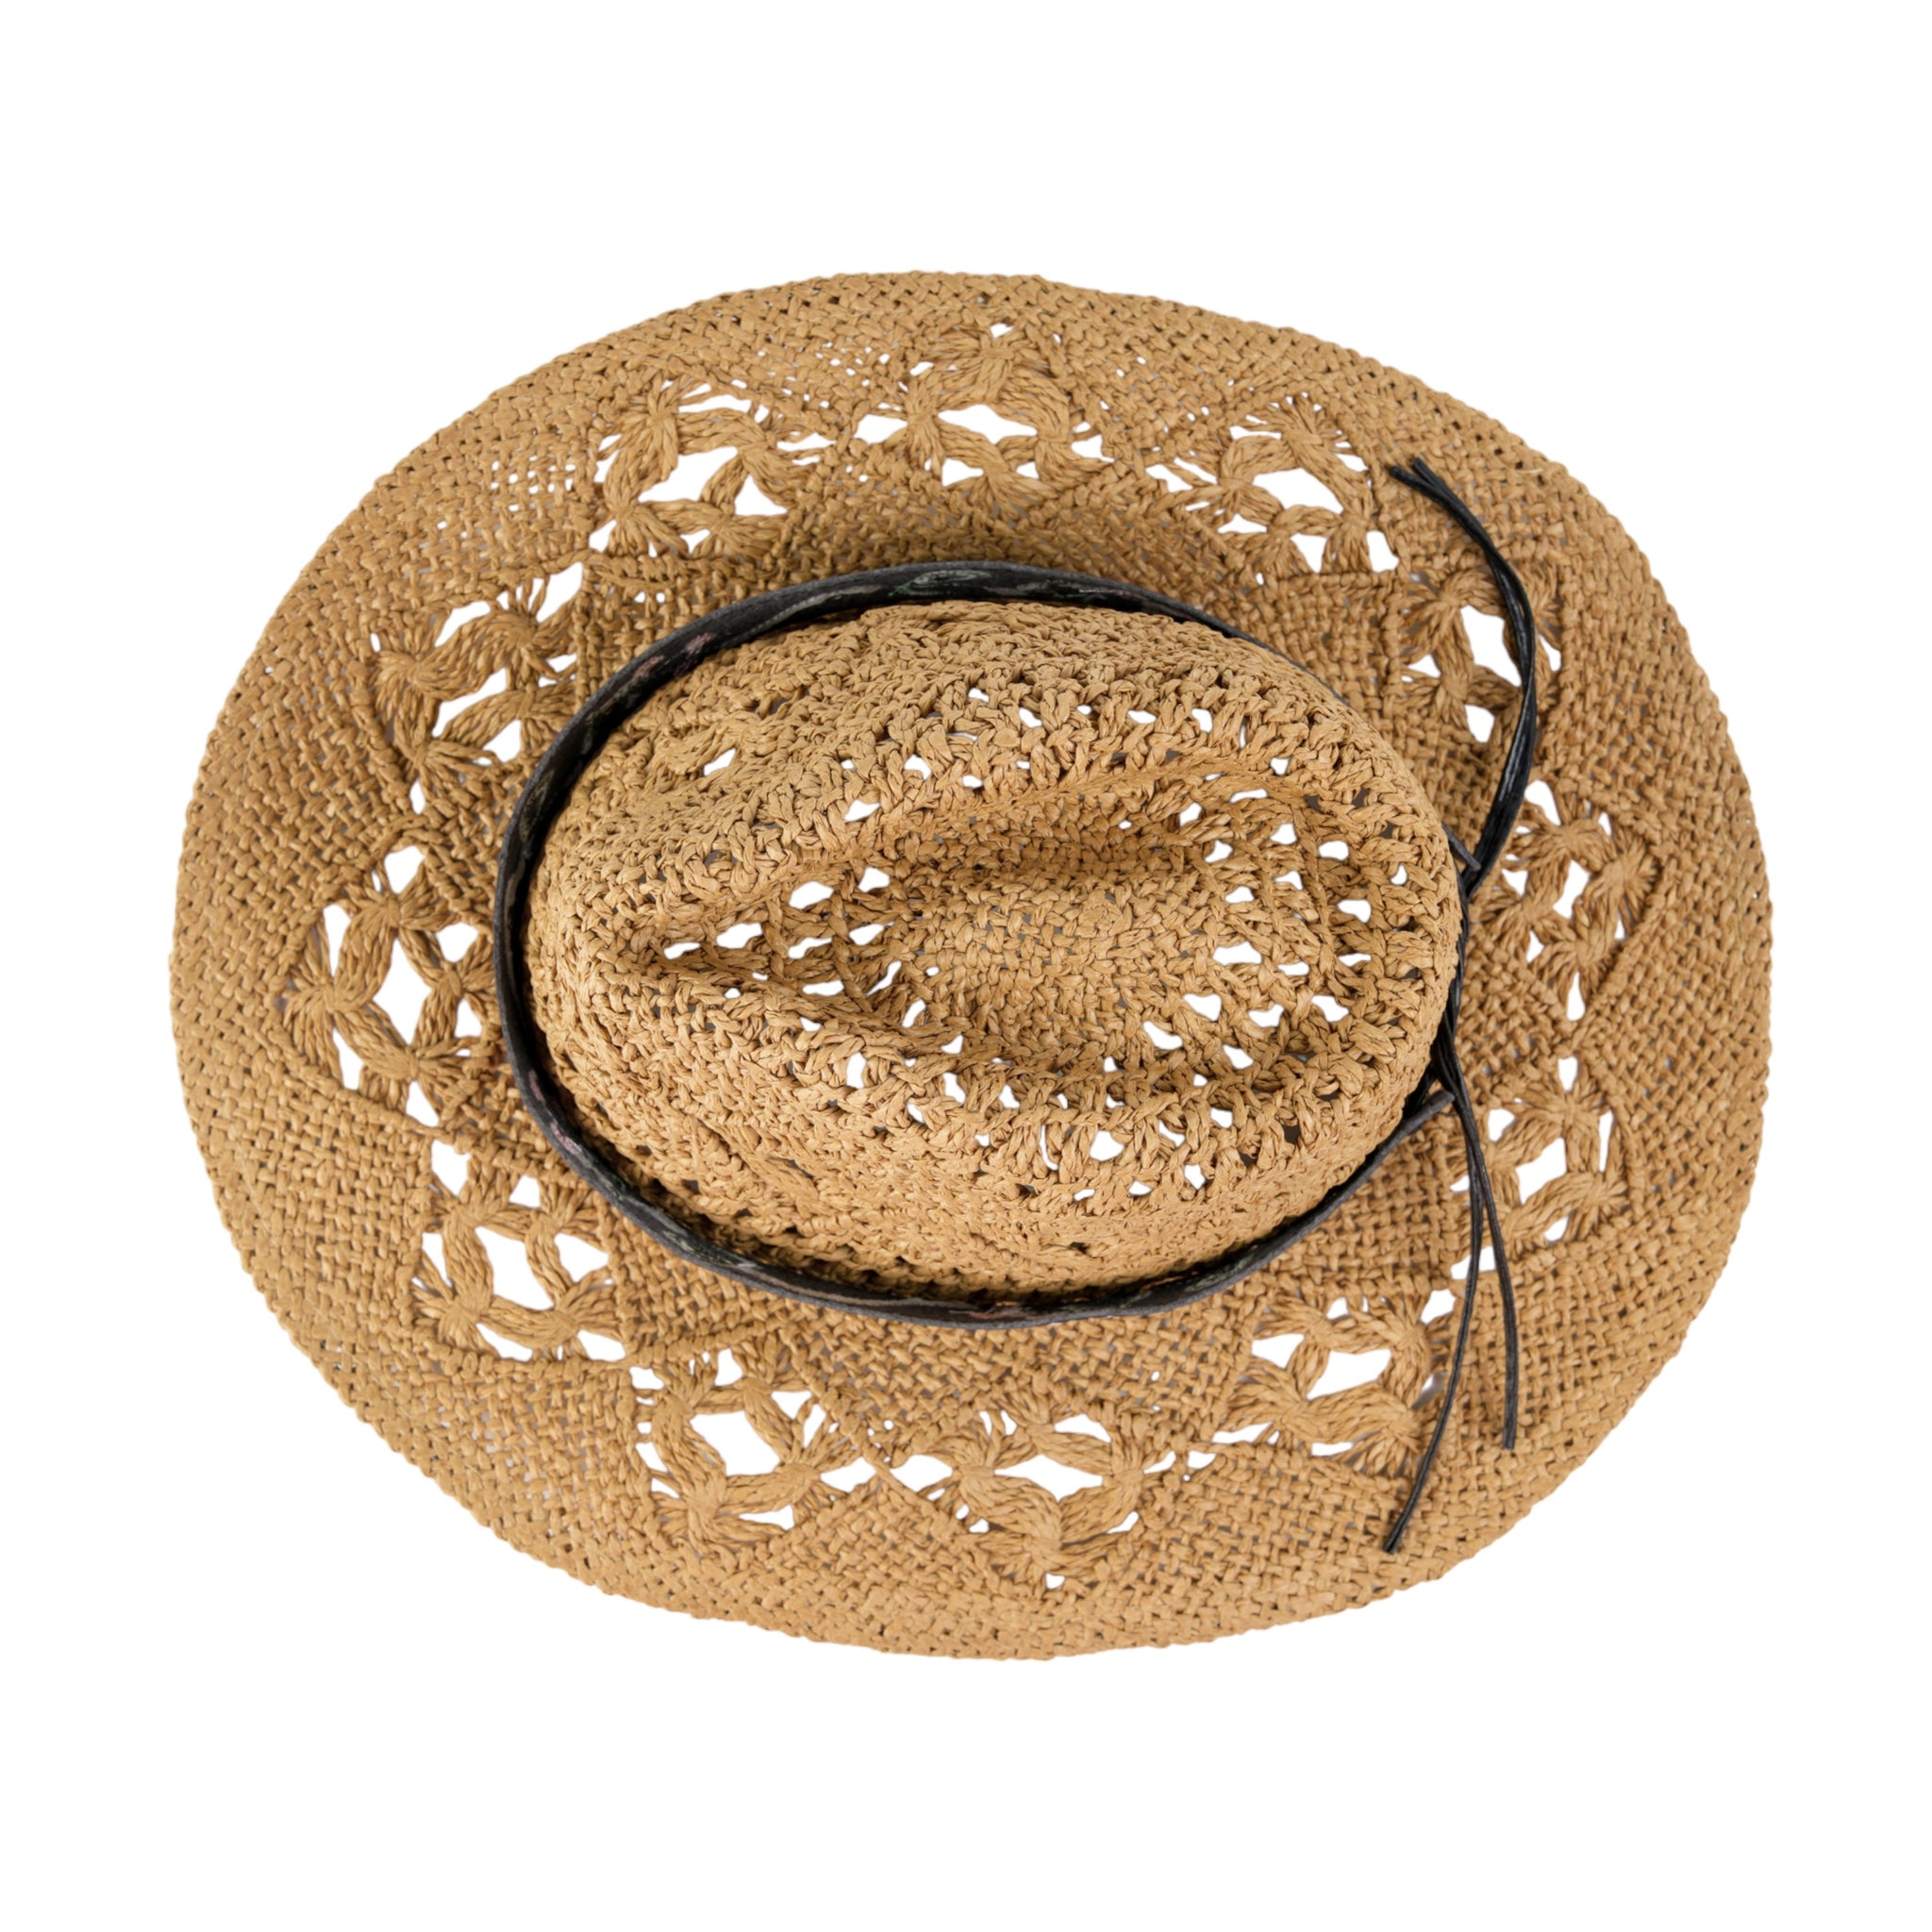 Chokore Handcrafted Cowboy Hat with Embroidered Belt (Khaki)